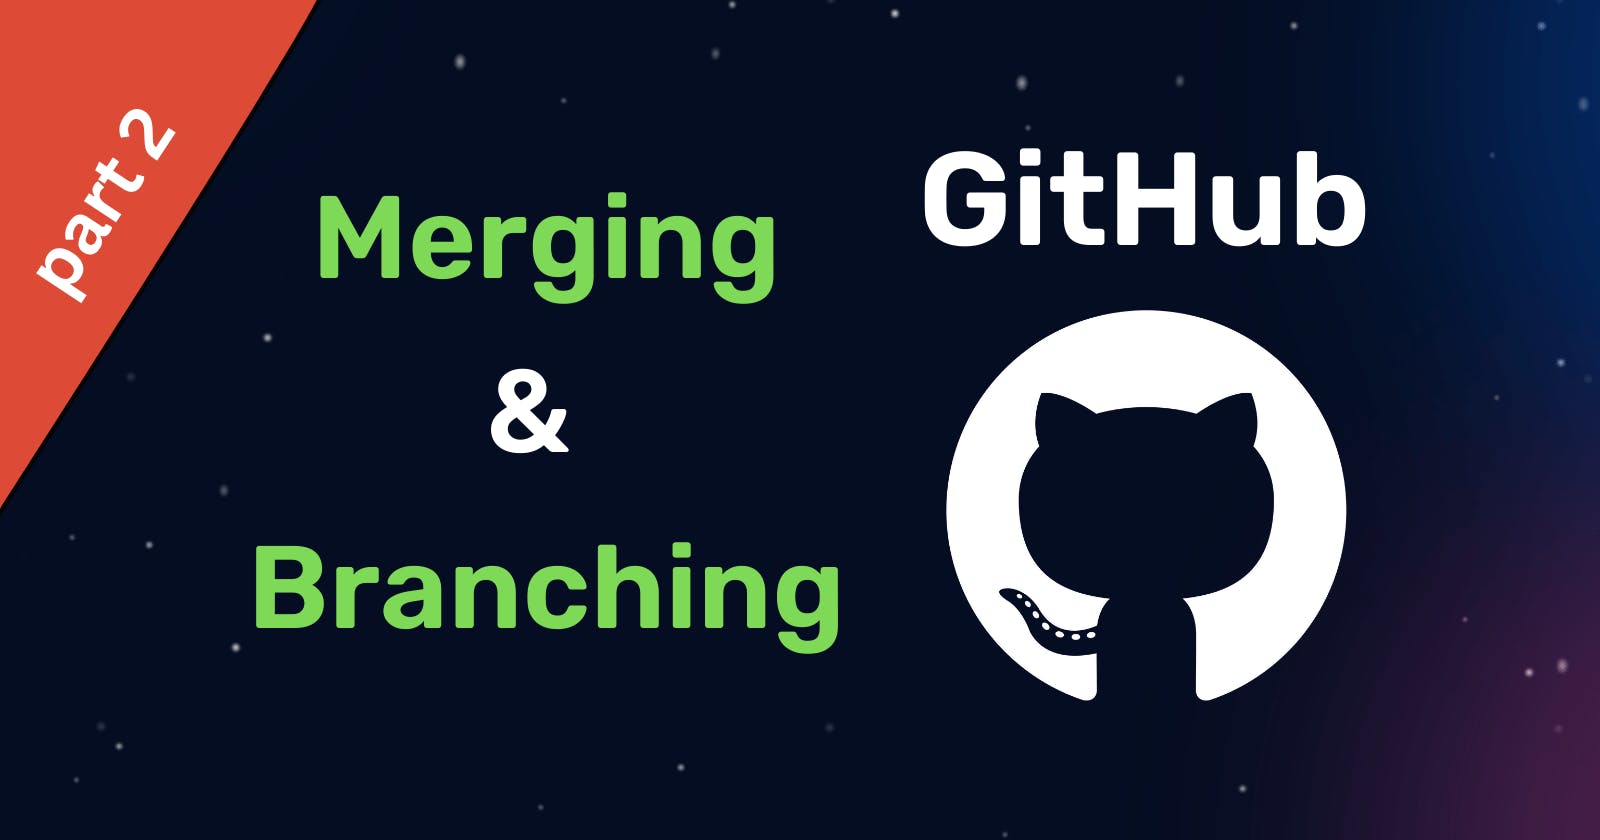 How to get started with Branching & Merging using Github?